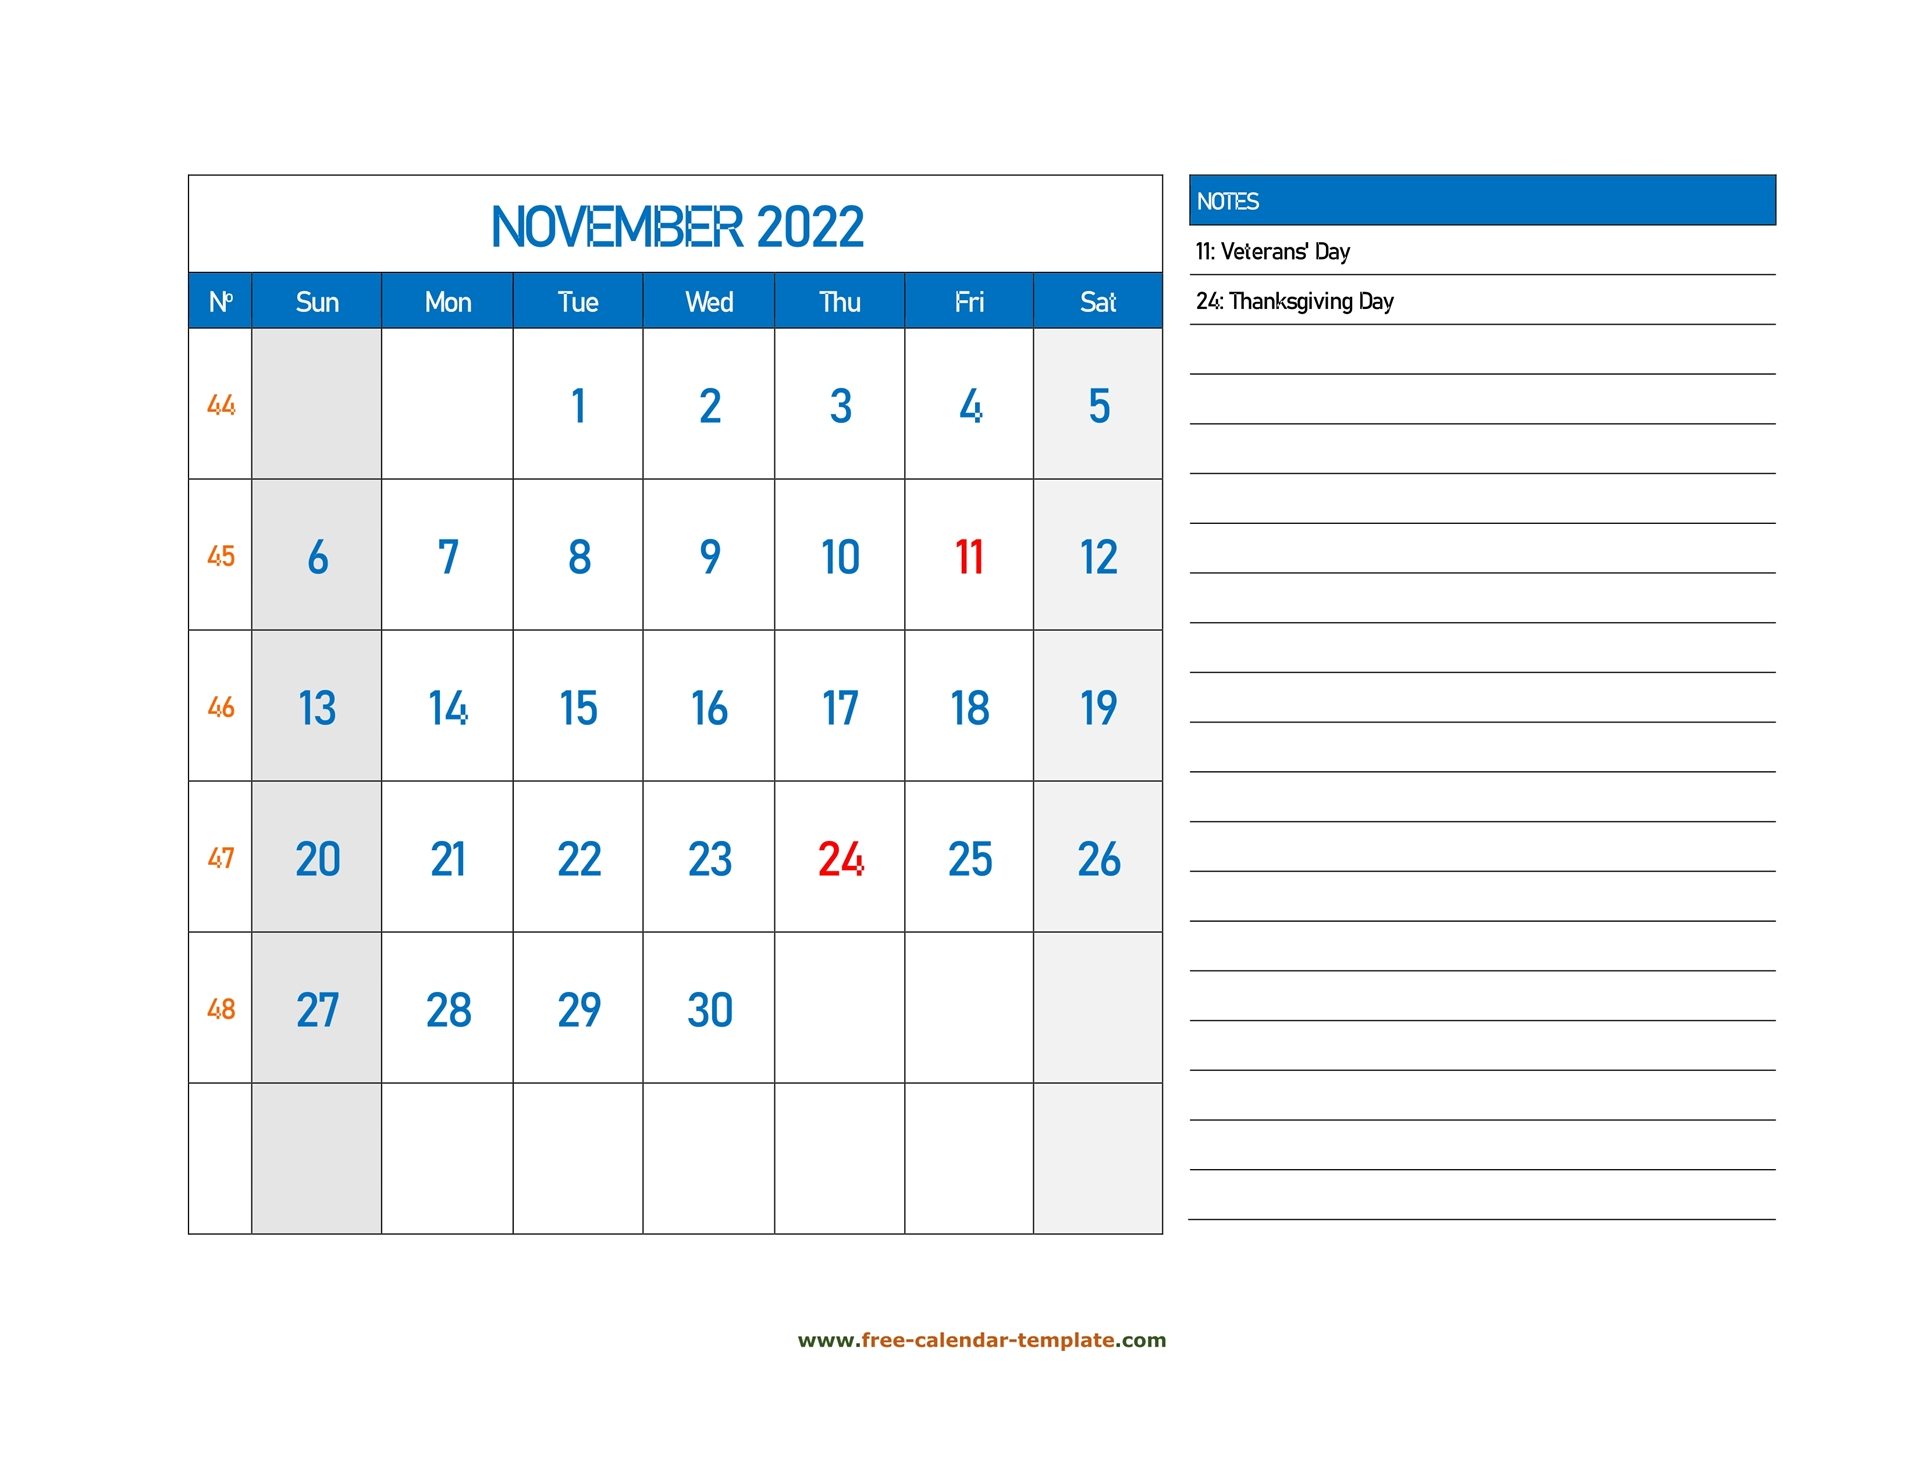 Get August 2022 Calendar With Holidays Canada